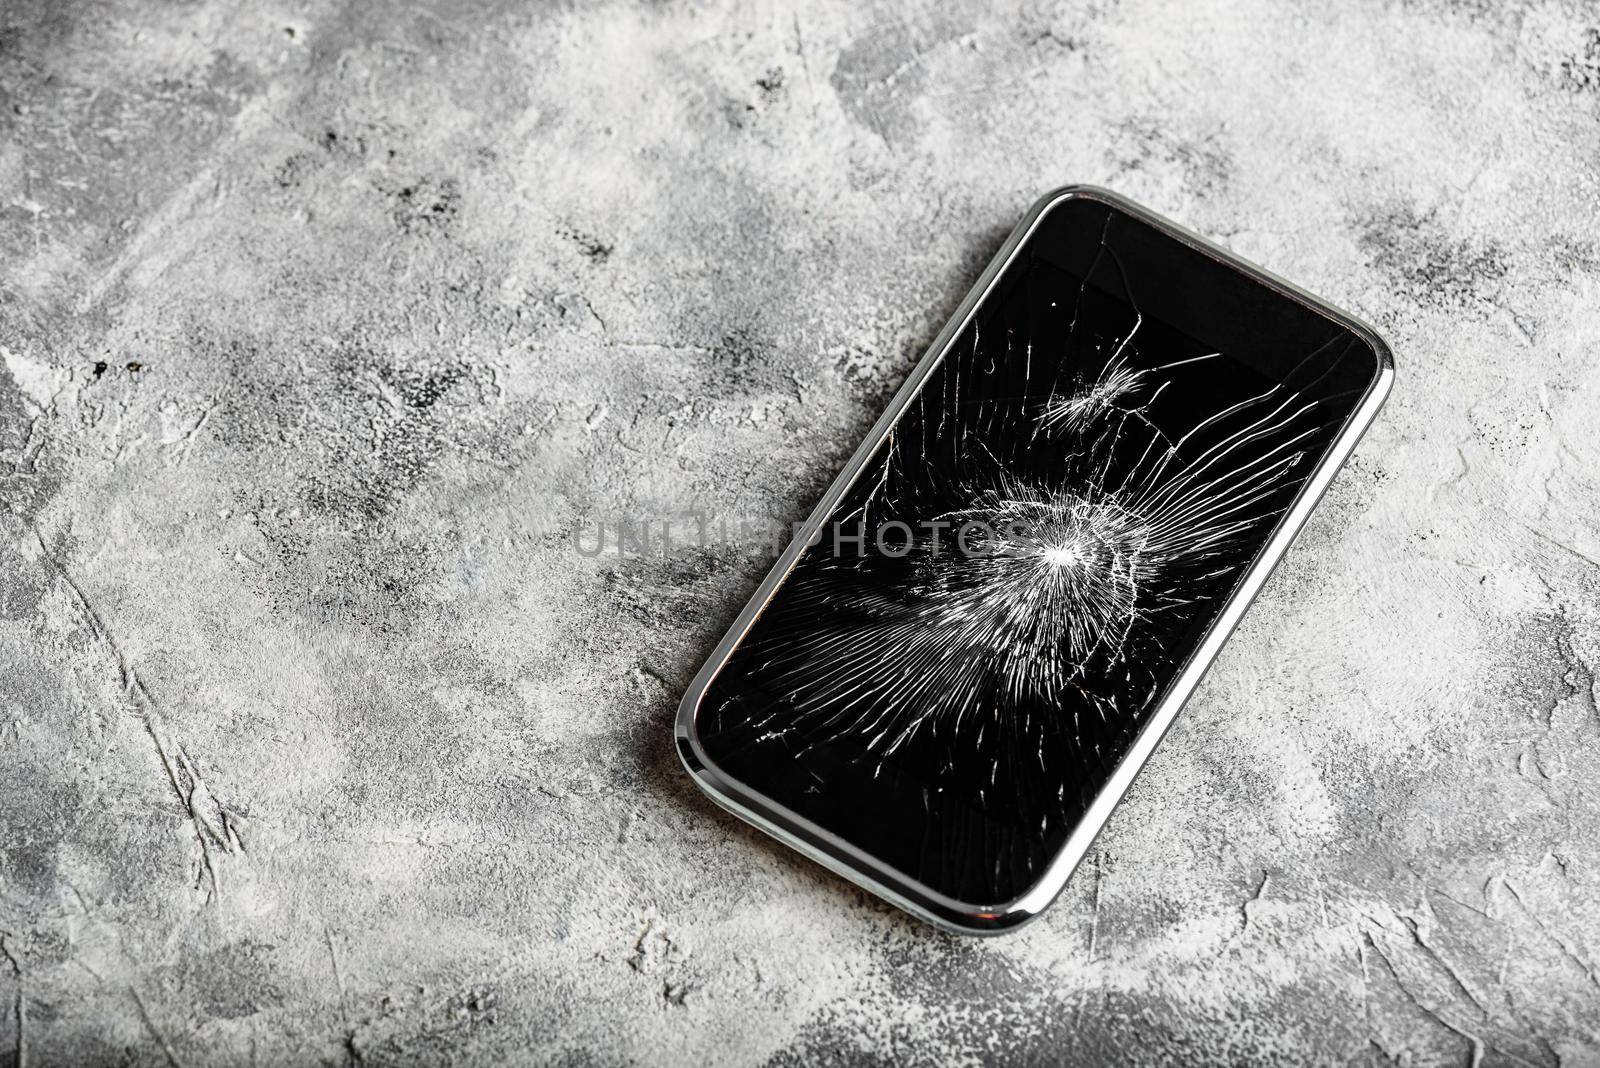 Smartphone with cracked screen by Seva_blsv